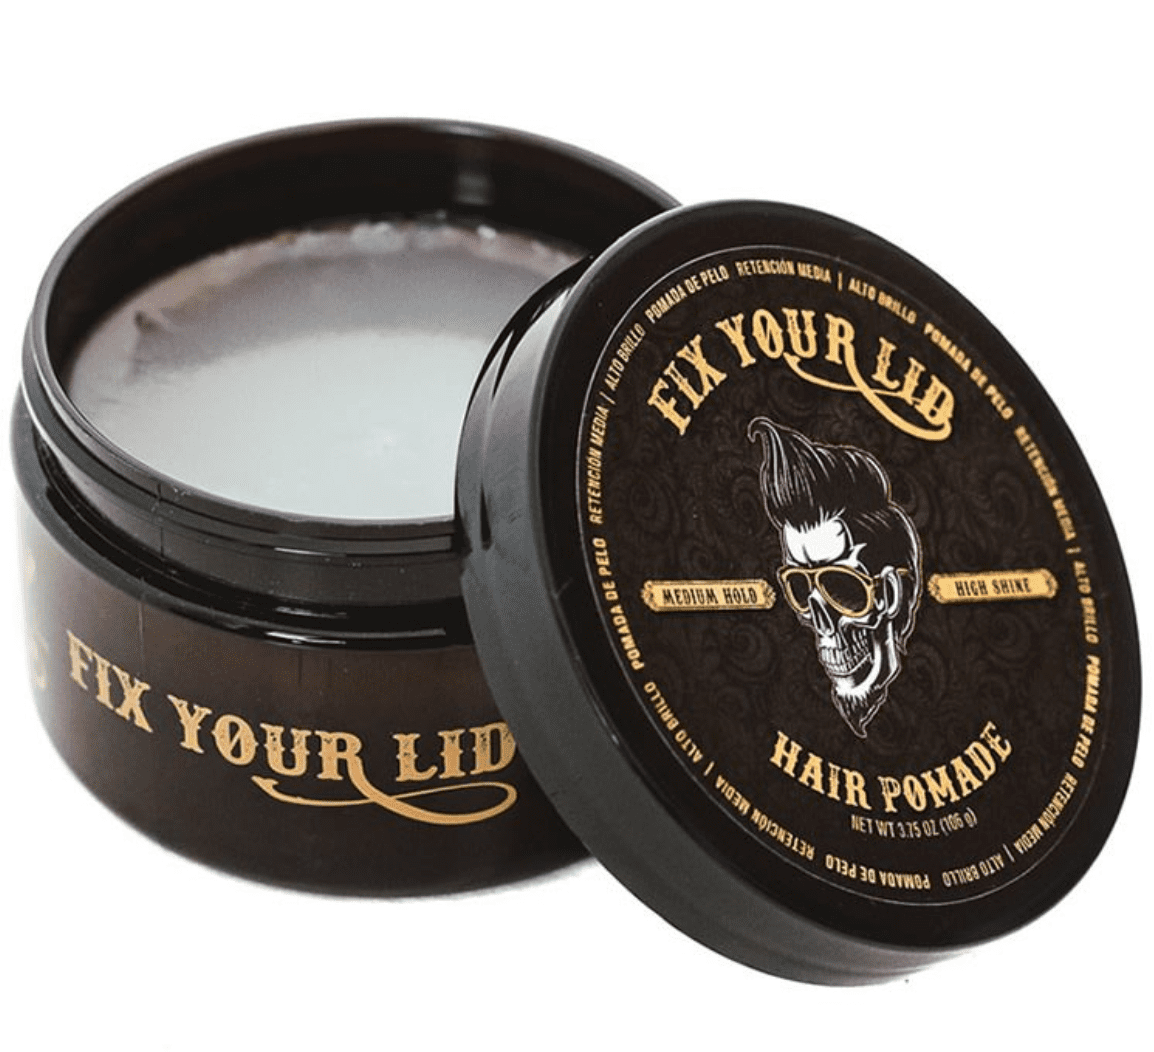 Flex your new fix with Fix Your Lid #fixyourlid